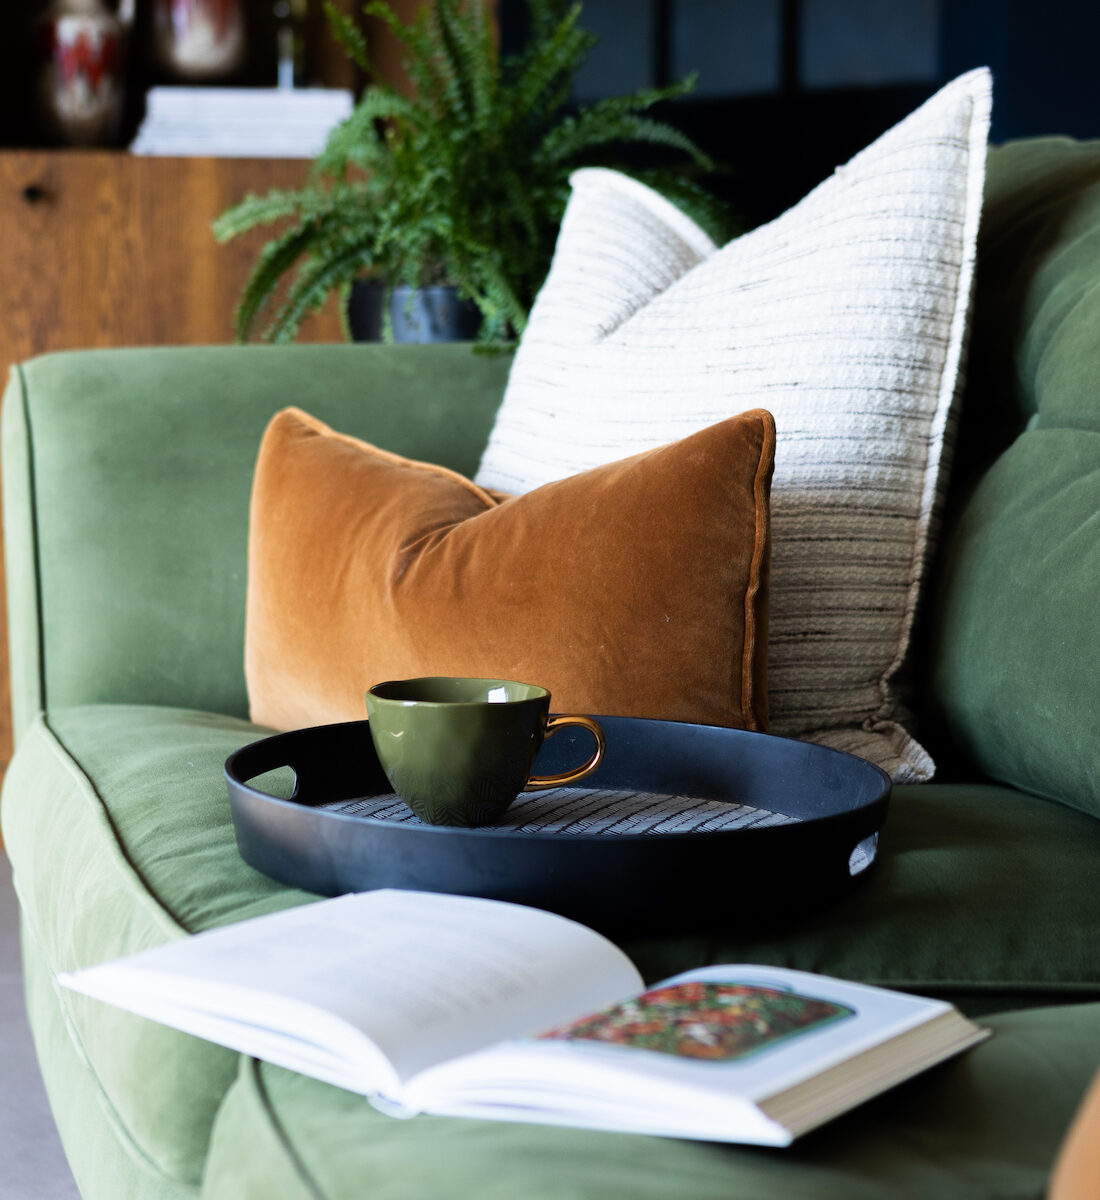 Cosy green bespoke upholstered velvet sofa with bespoke made soft furnishings, green mug on a coffee tray and an open book